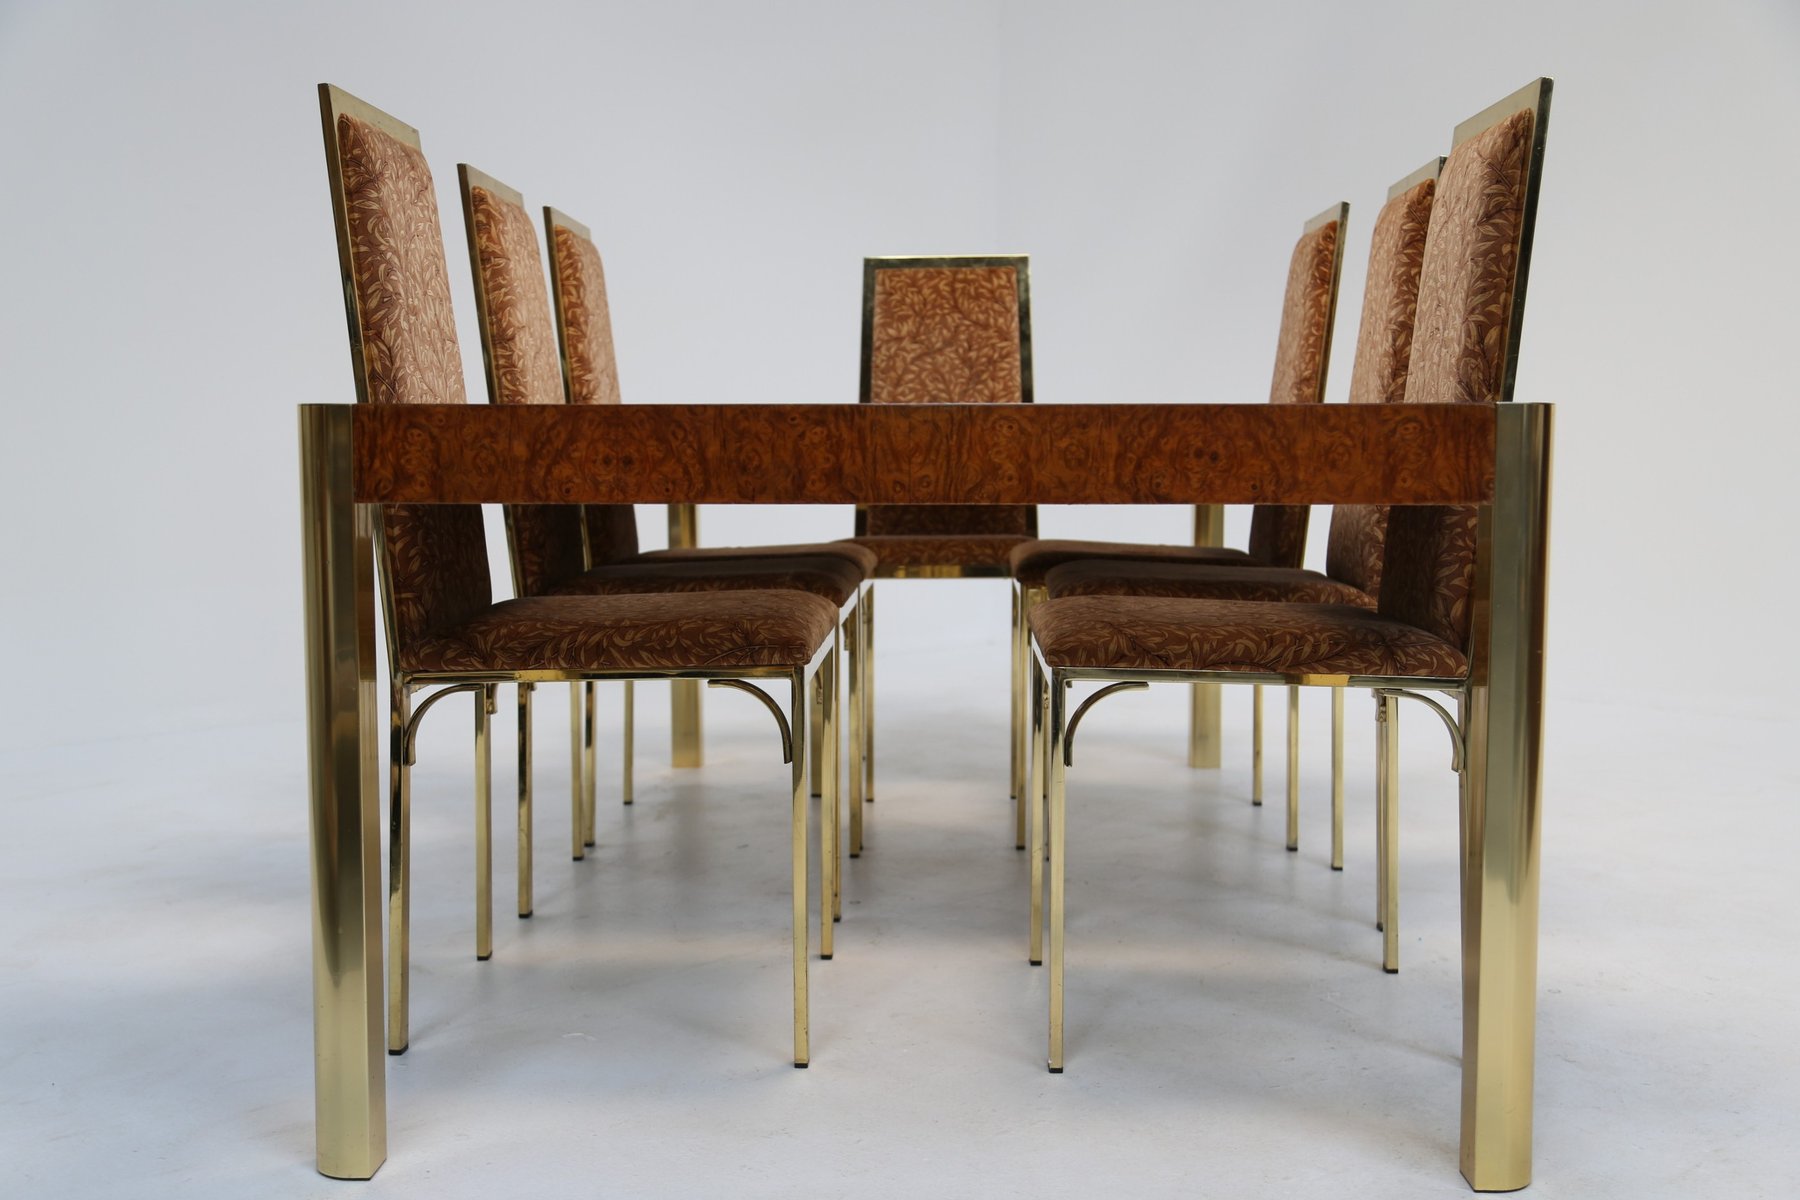 Burl Brass Glass Dining Table From Century Furniture 1970s For